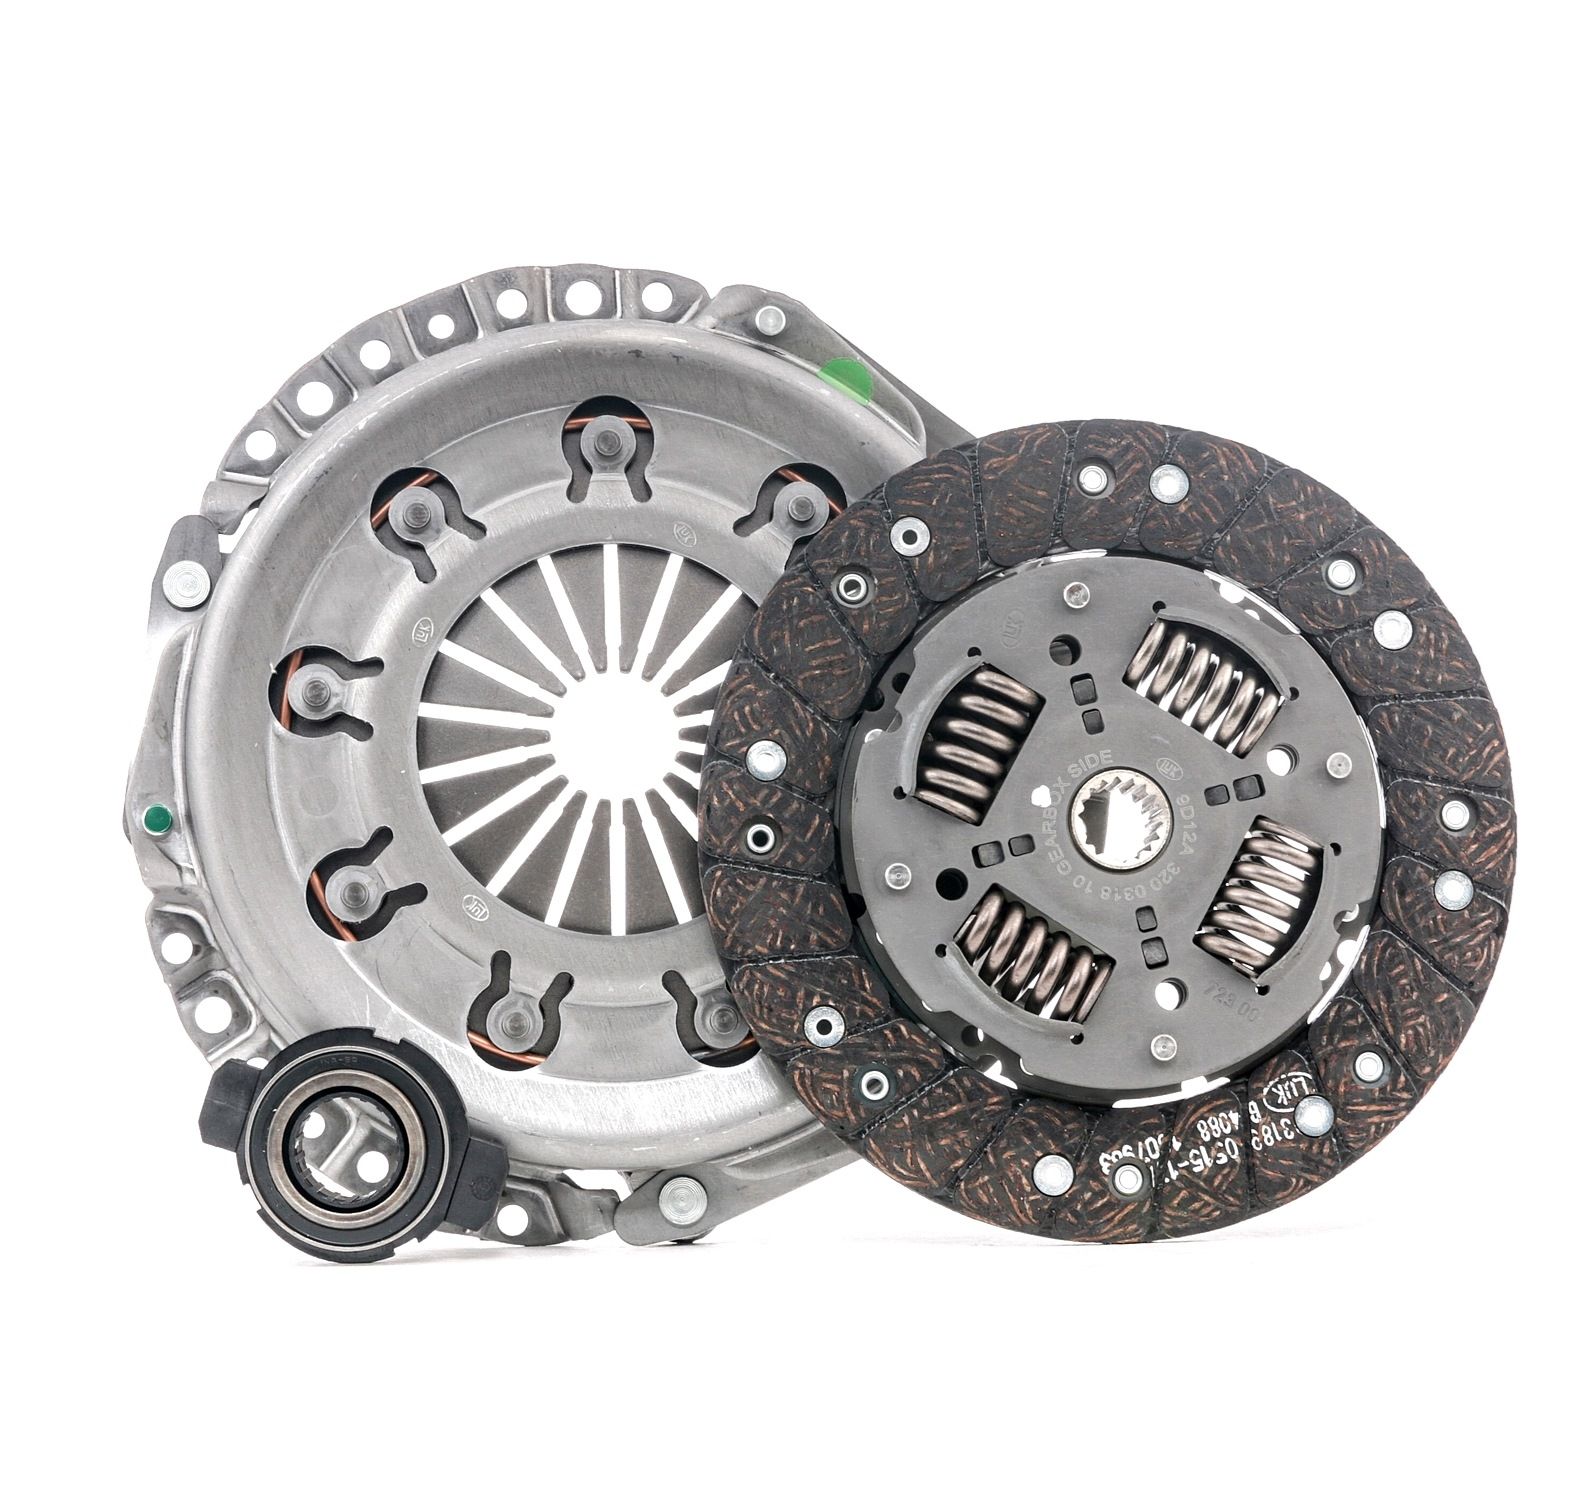 LuK BR 0222 620 3049 00 Clutch kit with clutch release bearing, with clutch disc, 200mm